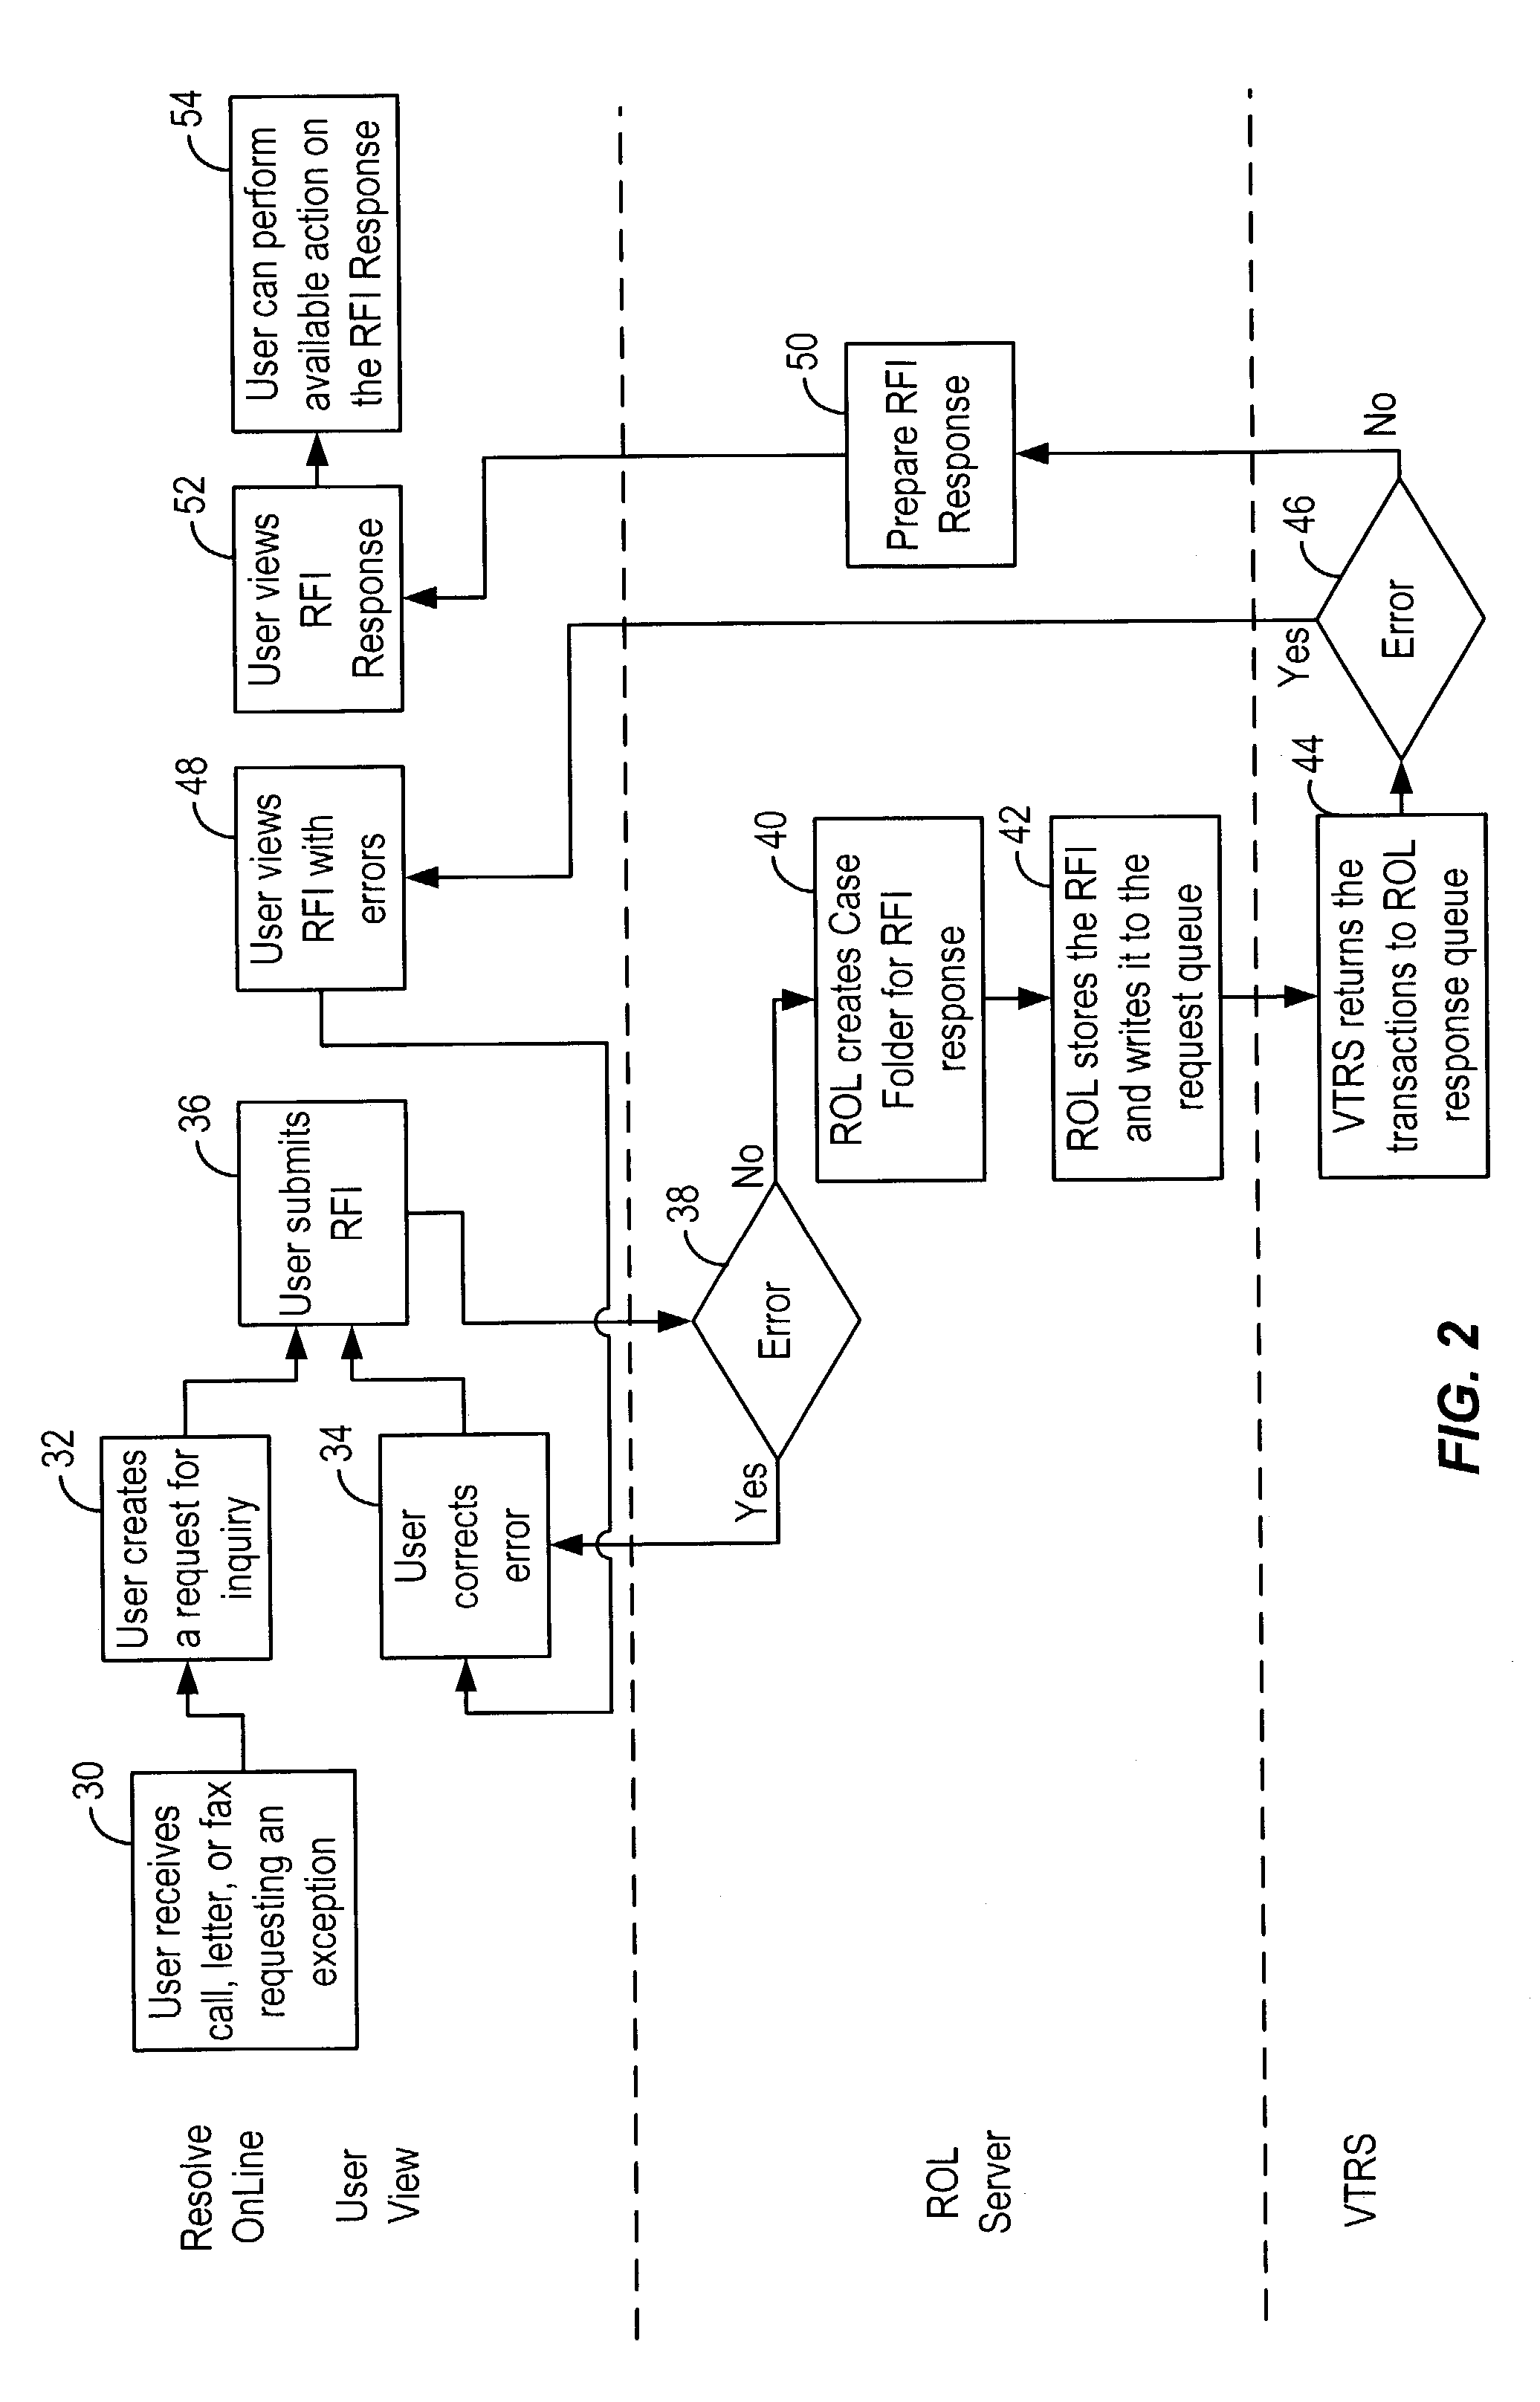 Method and system for facilitating electronic dispute resolution